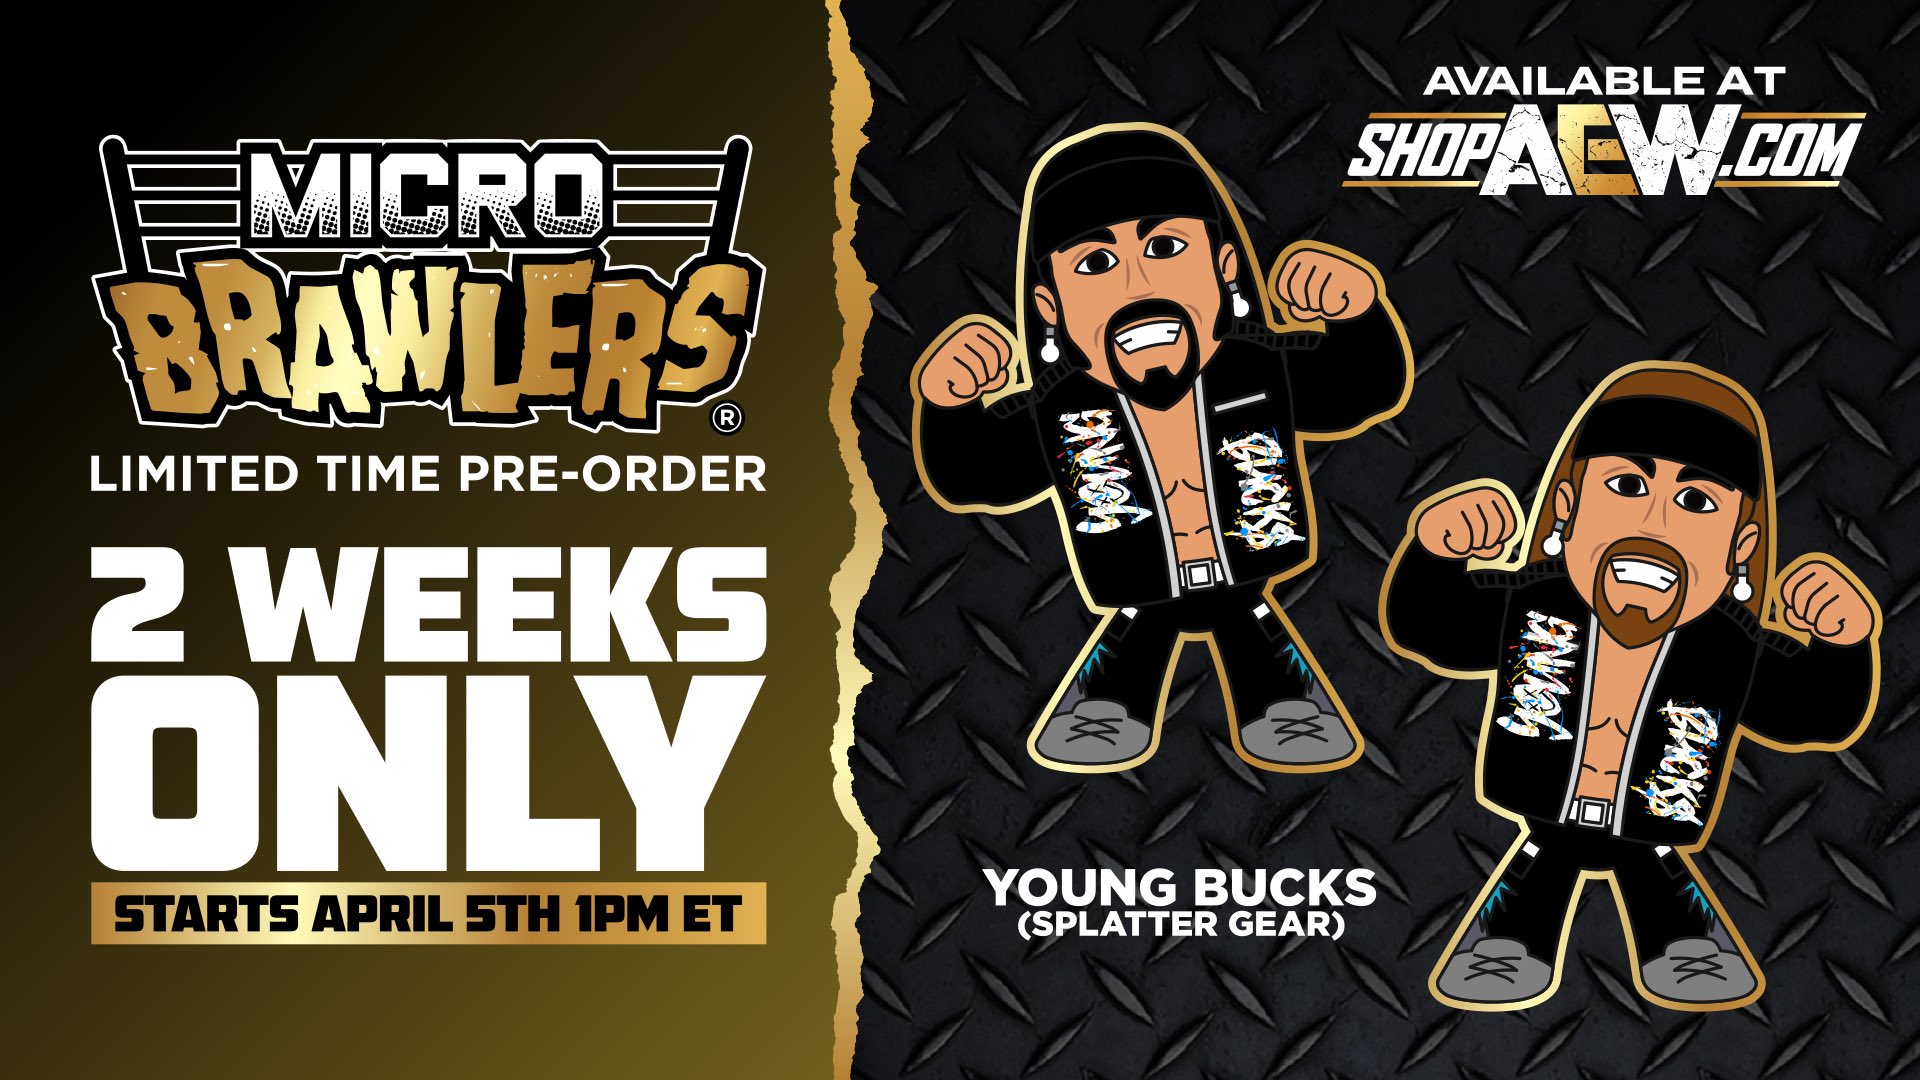 Pro Wrestling Tees on X: @youngbucks Micro Brawlers available for